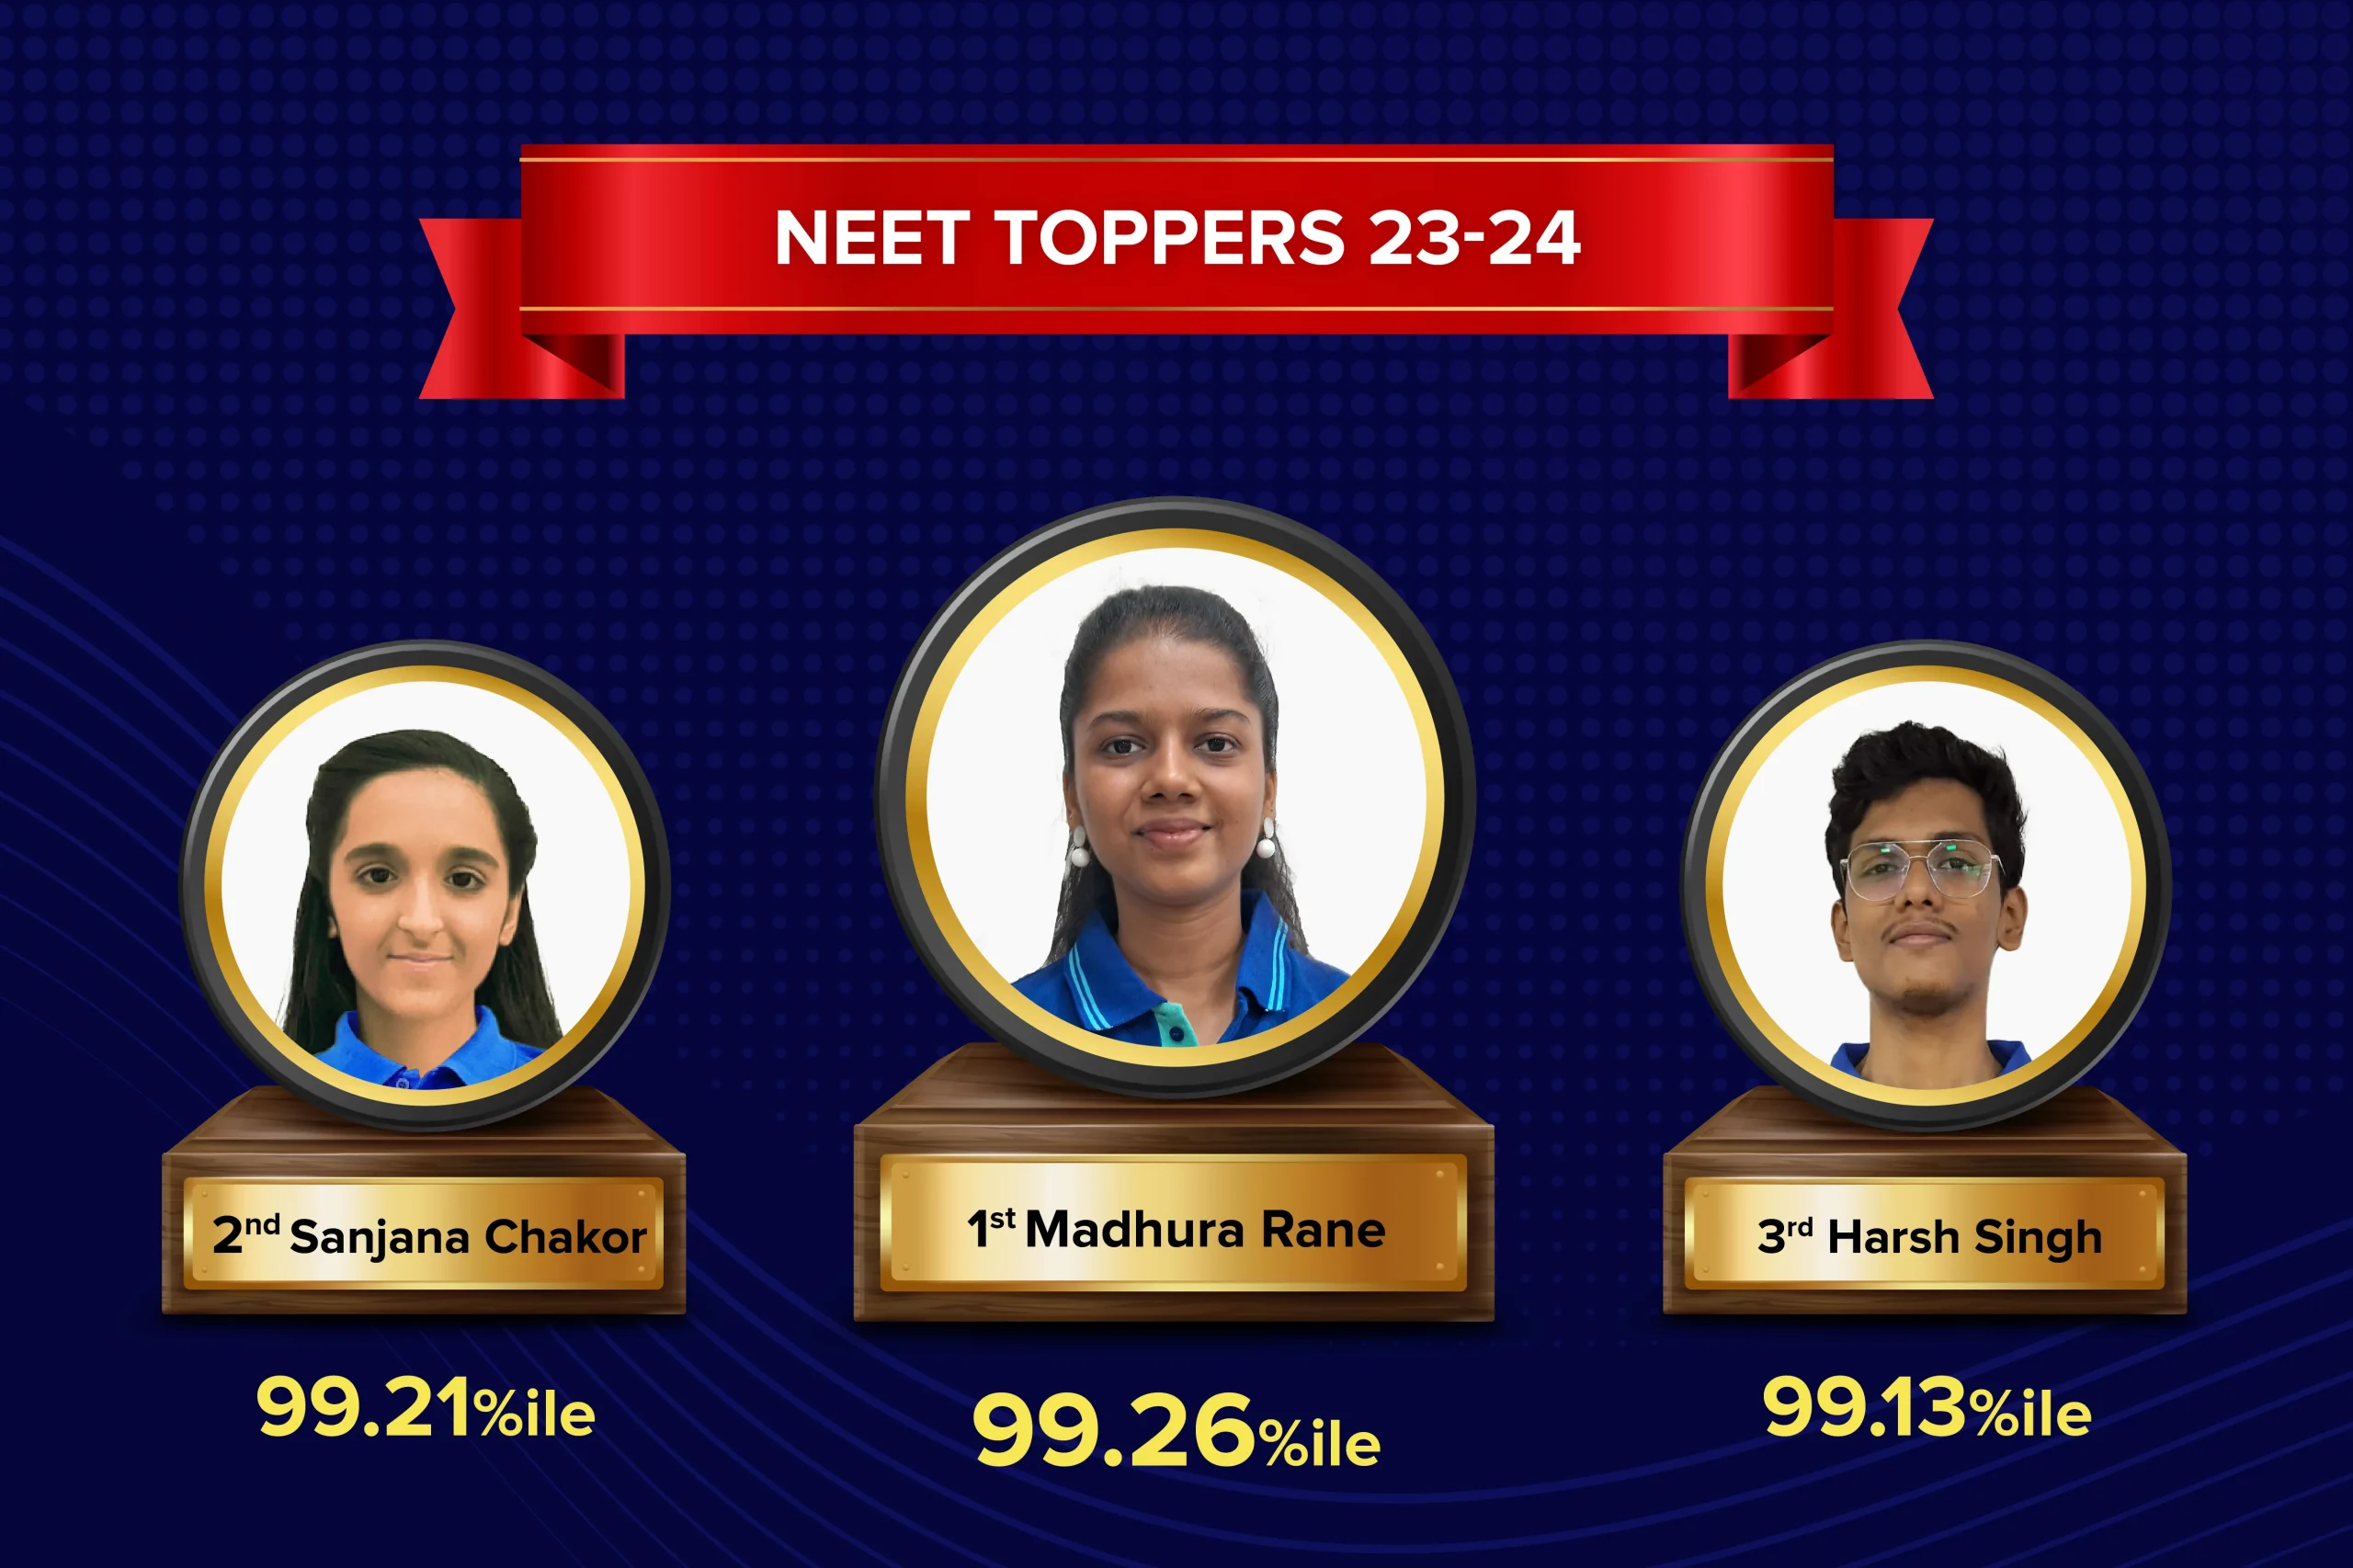 NEET Toppers 2023-24